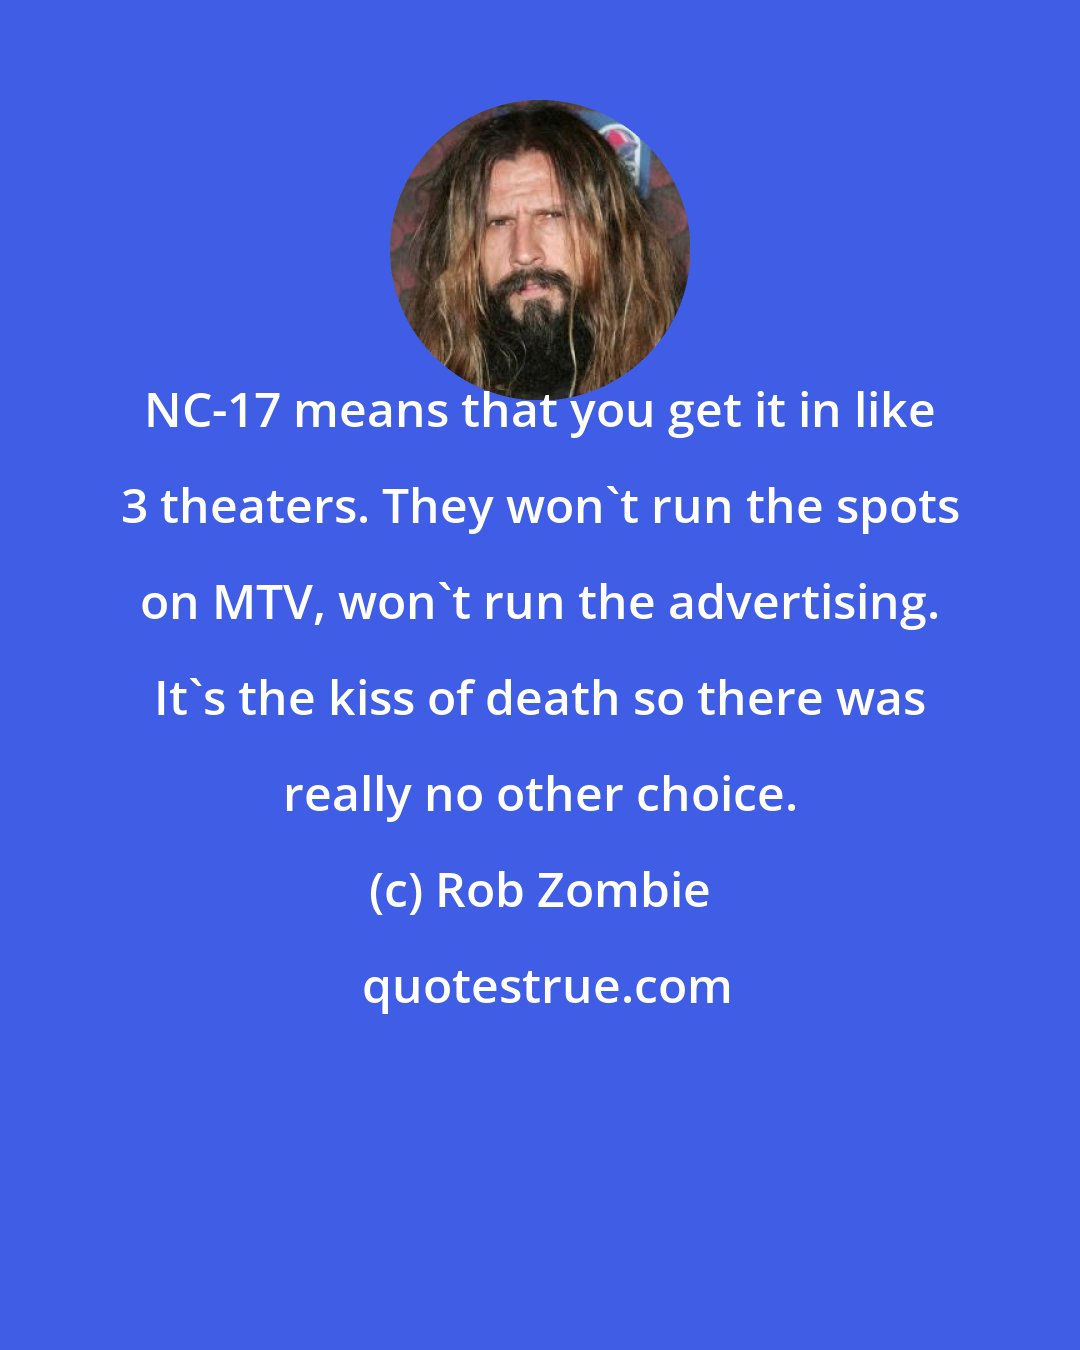 Rob Zombie: NC-17 means that you get it in like 3 theaters. They won't run the spots on MTV, won't run the advertising. It's the kiss of death so there was really no other choice.